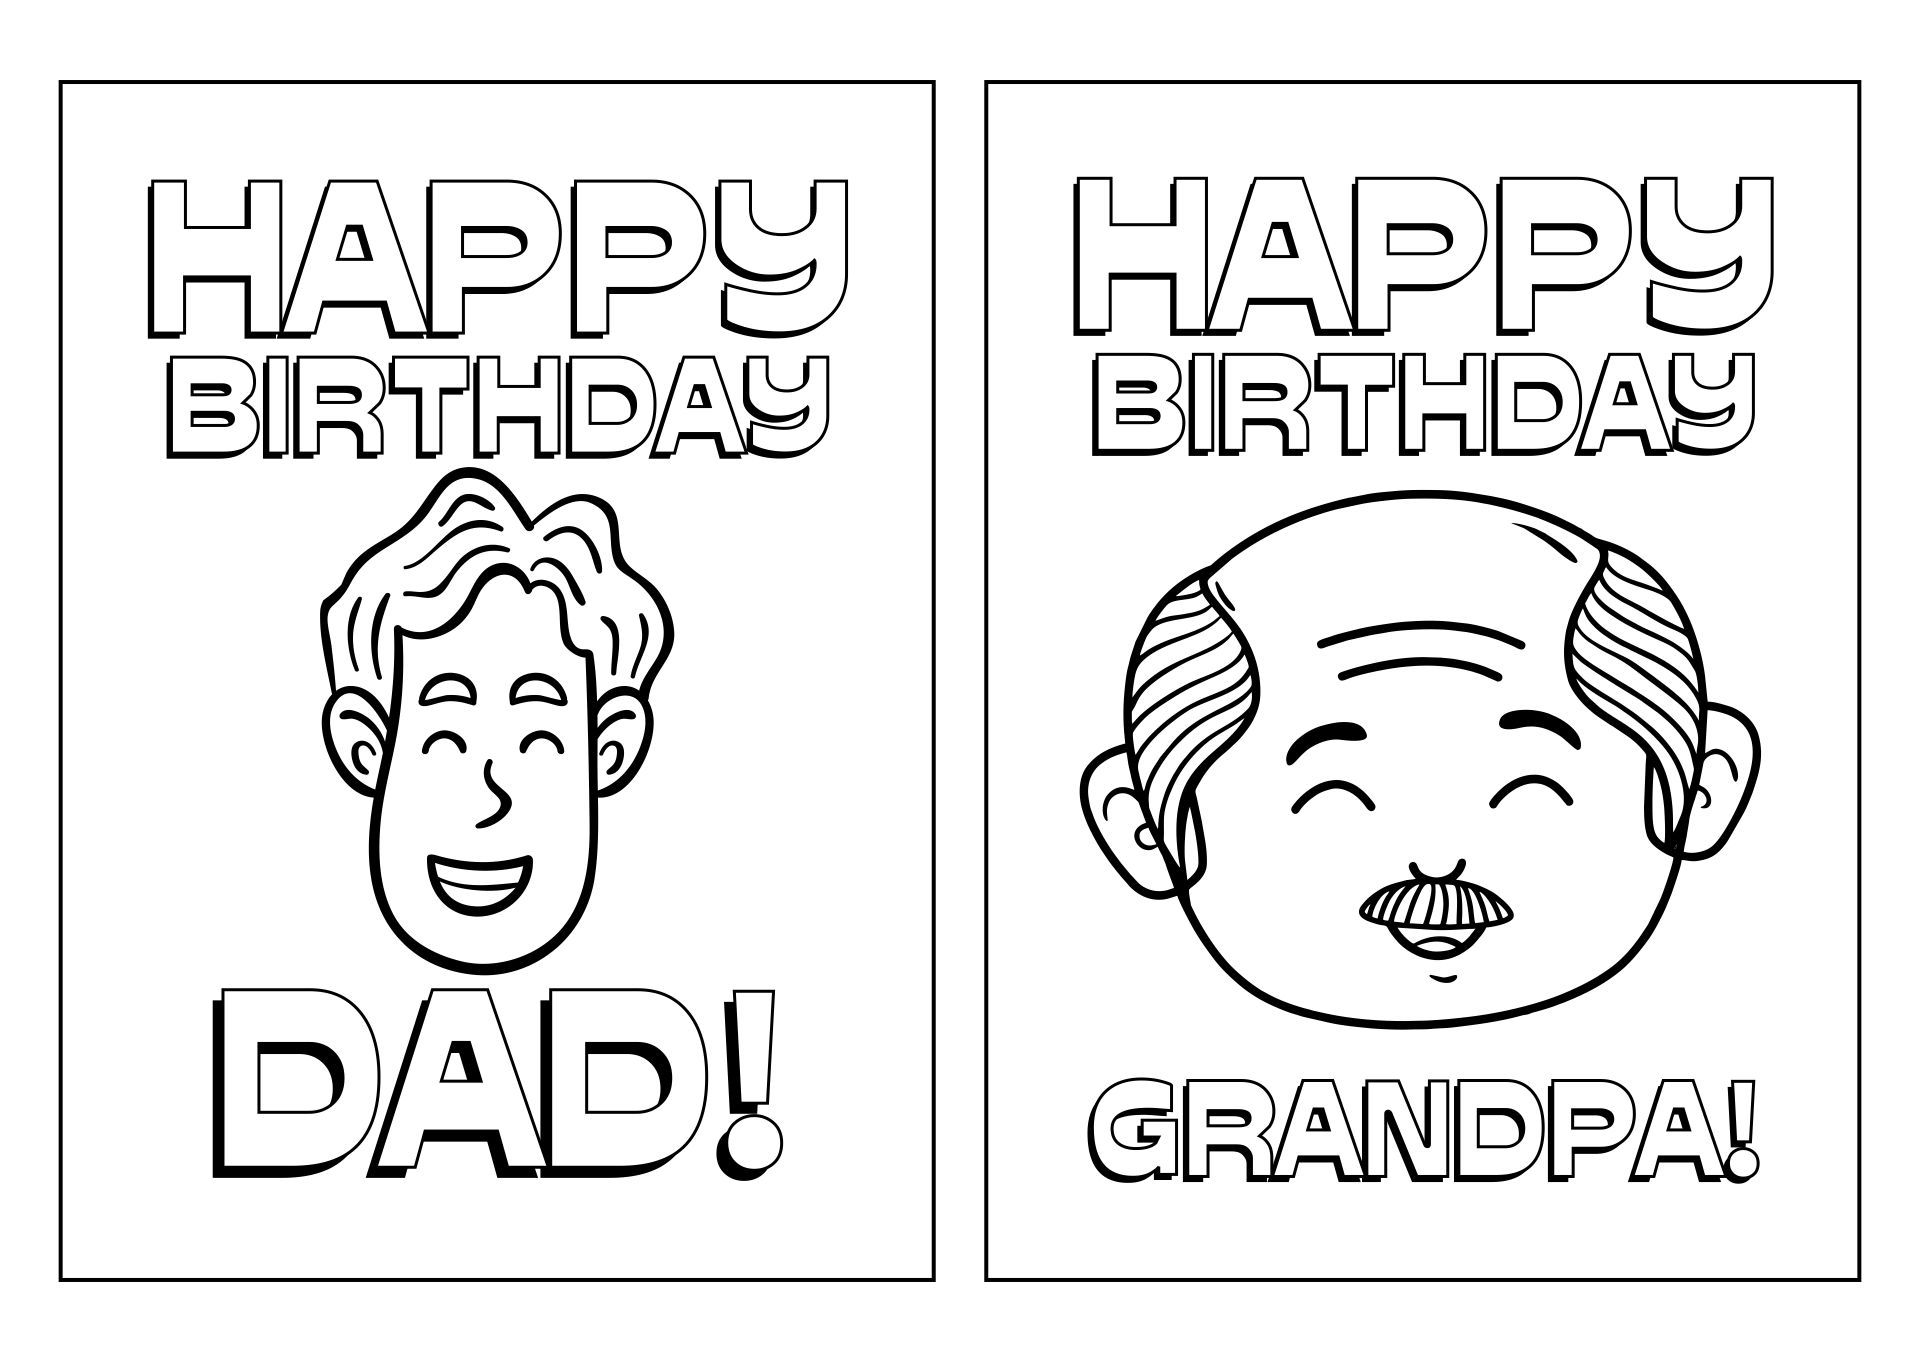 Printable Coloring Birthday Cards For Dad & Grandpa